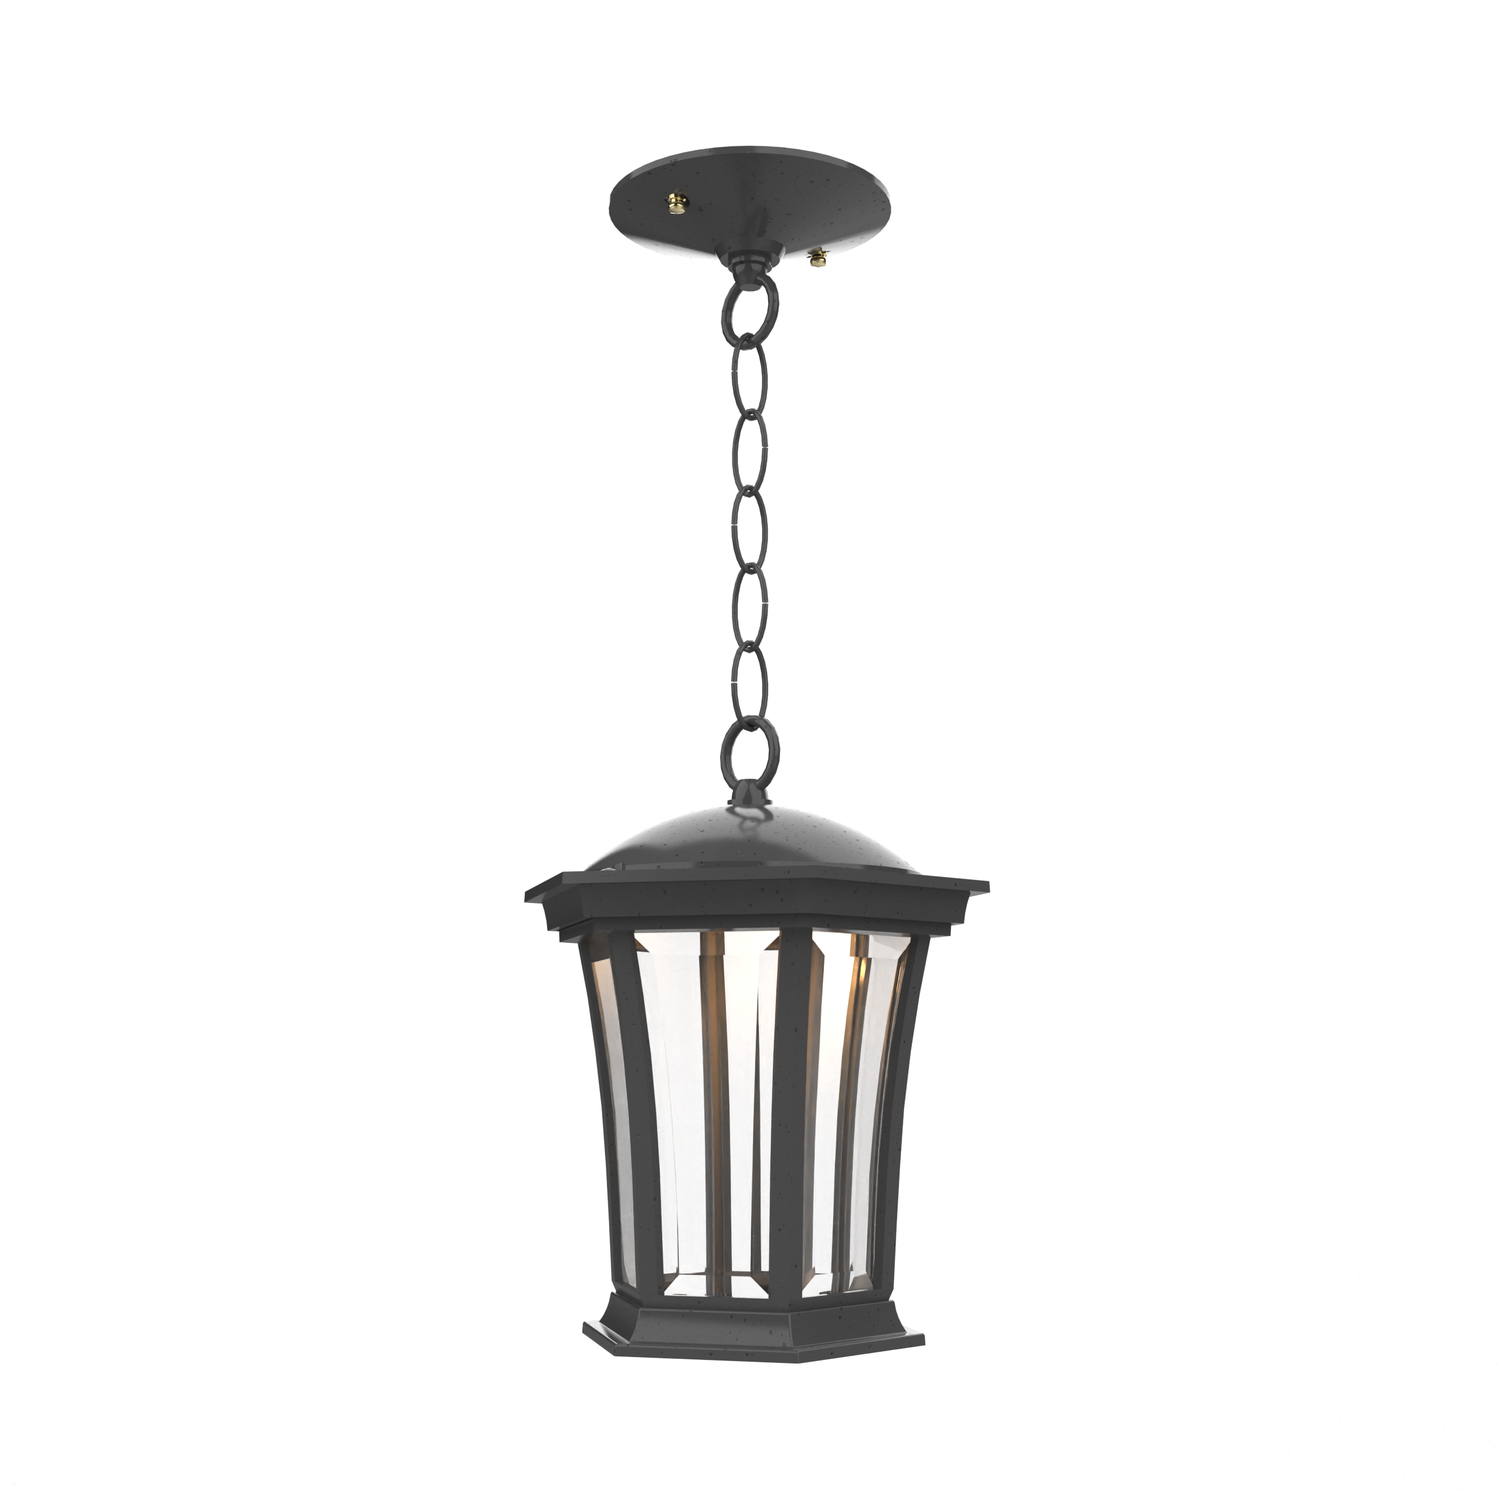 Westminster - Ceiling mount with chain open bottom small - 13550